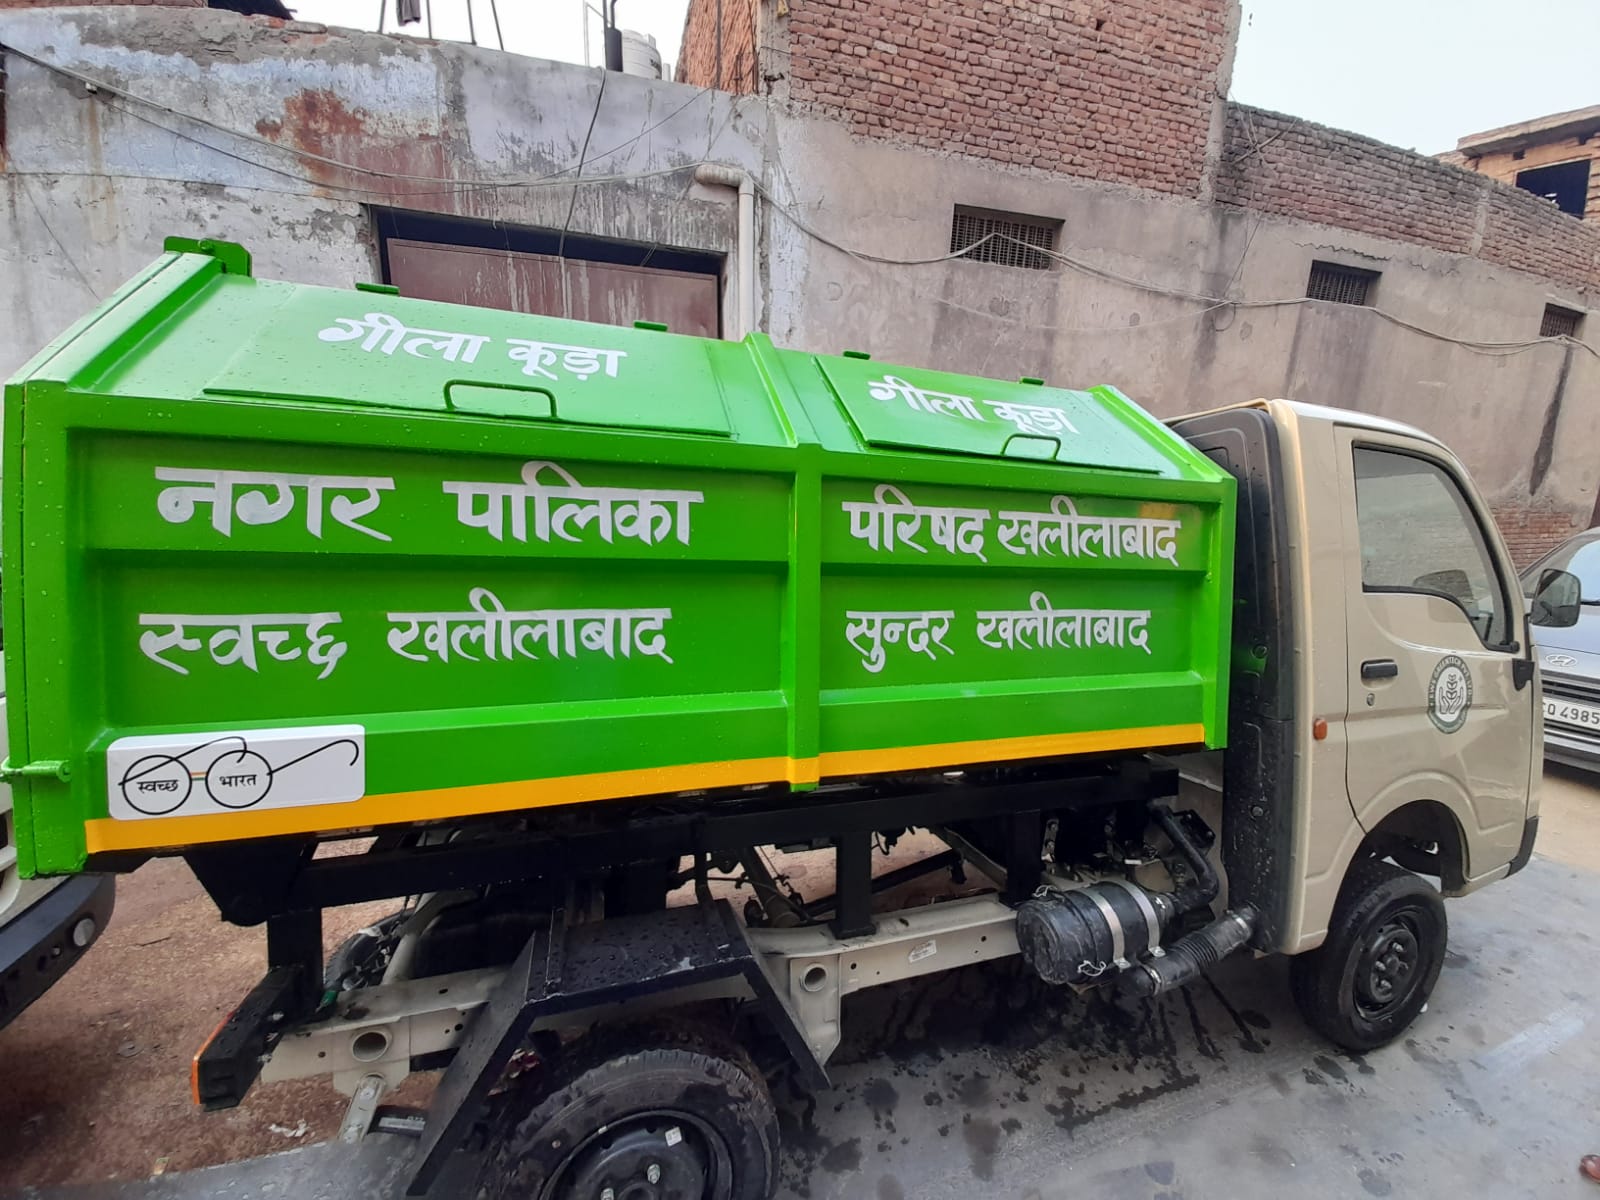 garbe-tipeer-or-auto-tipper-for-garbage-collection